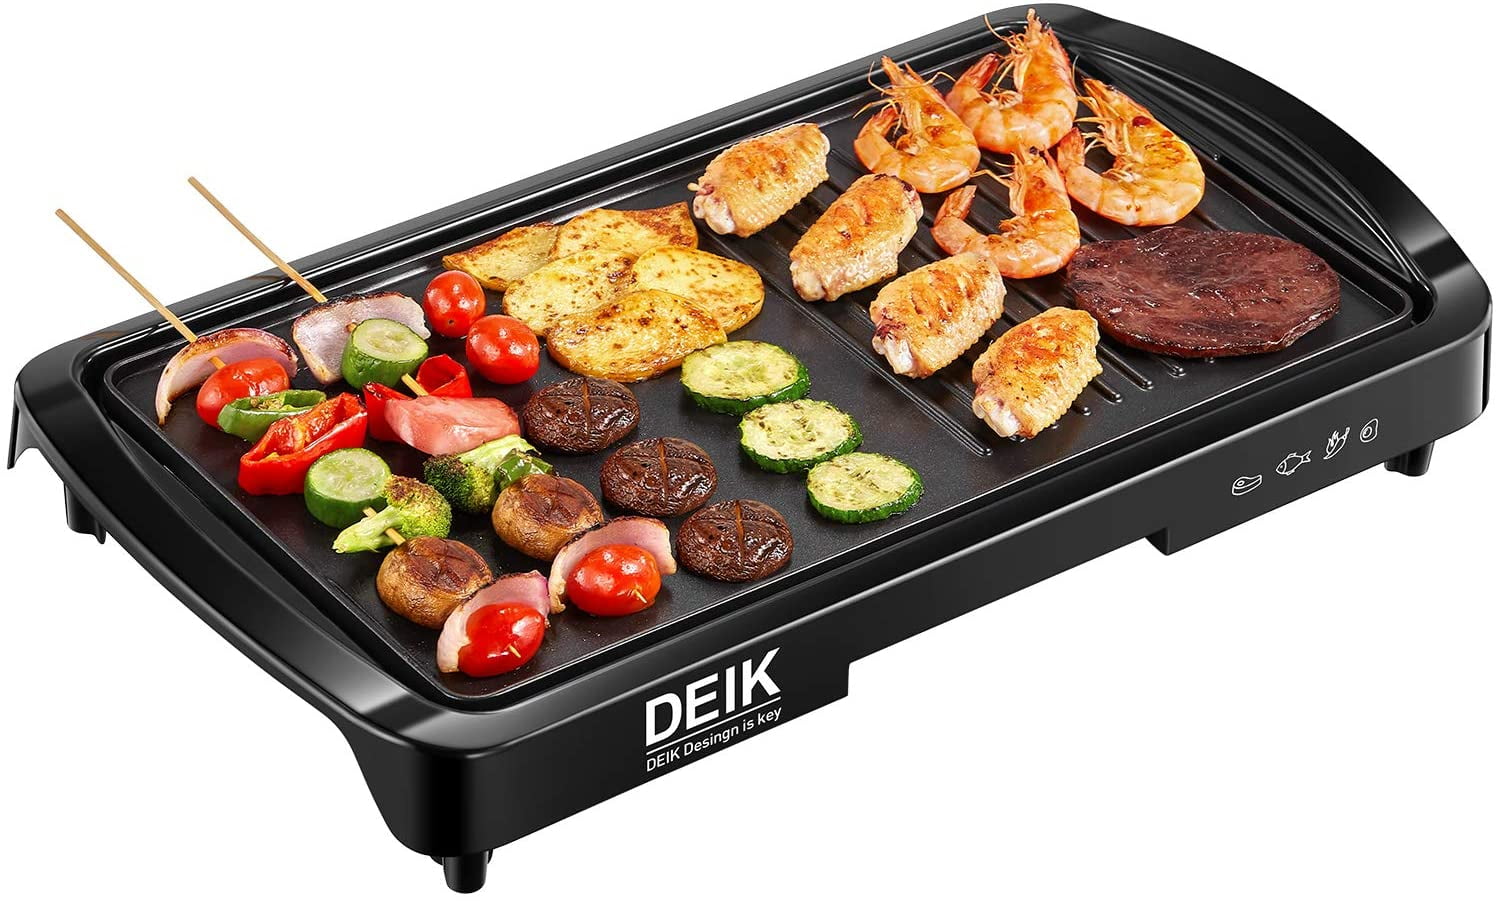 Spatula 1200W Smokeless Grill with Double-Sided Heating Plates Easy-to-Clean Nonstick Plate Extra-Large Drip Tray Thermostat Control Black Deik 2 in 1 Electric Indoor Grill & Panini Press Grill 